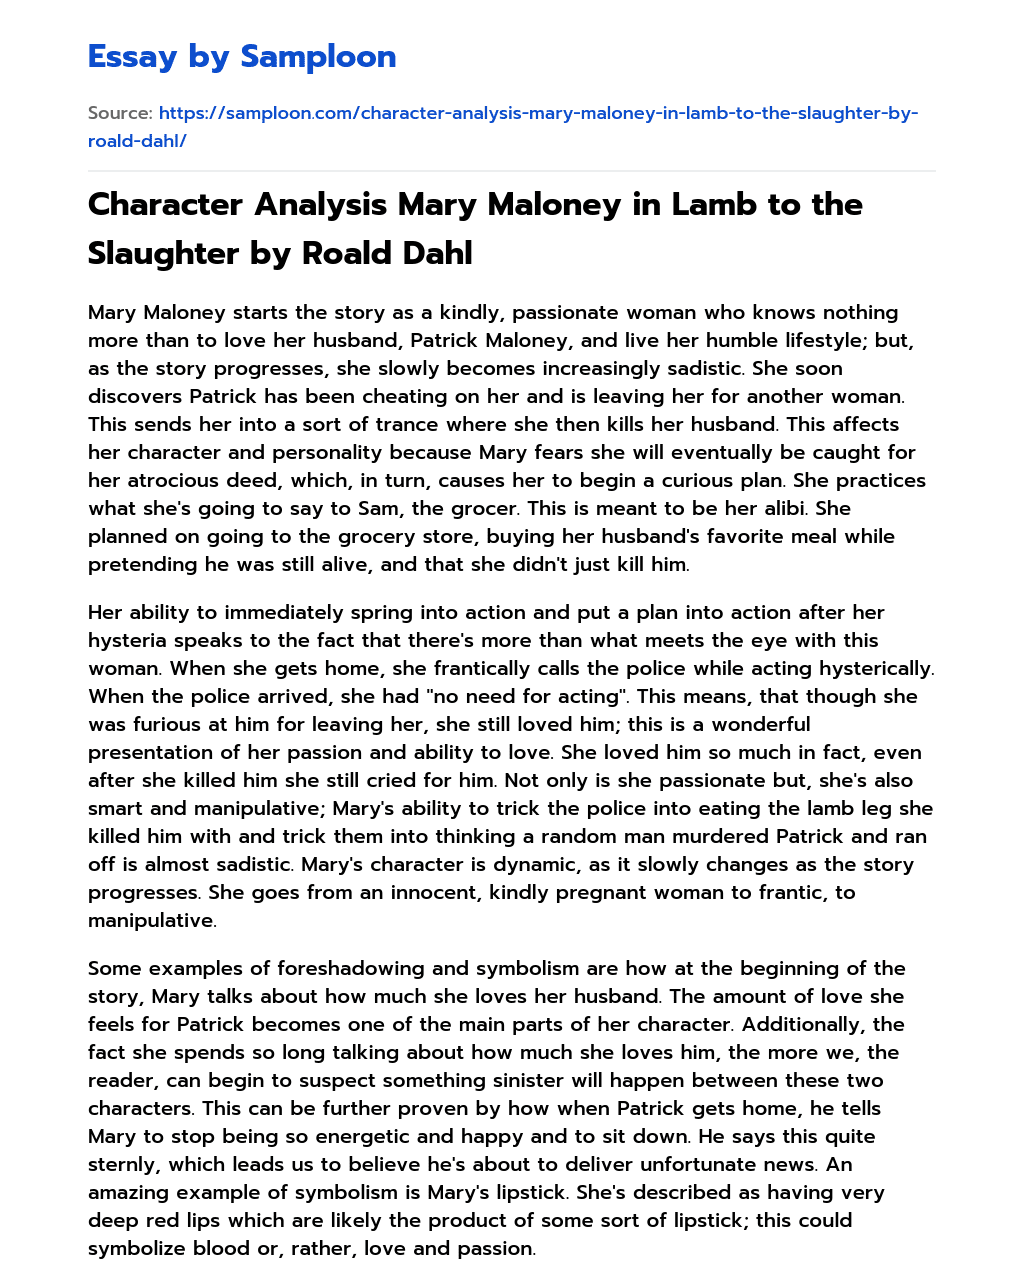 Character Analysis Mary Maloney in Lamb to the Slaughter by Roald Dahl essay